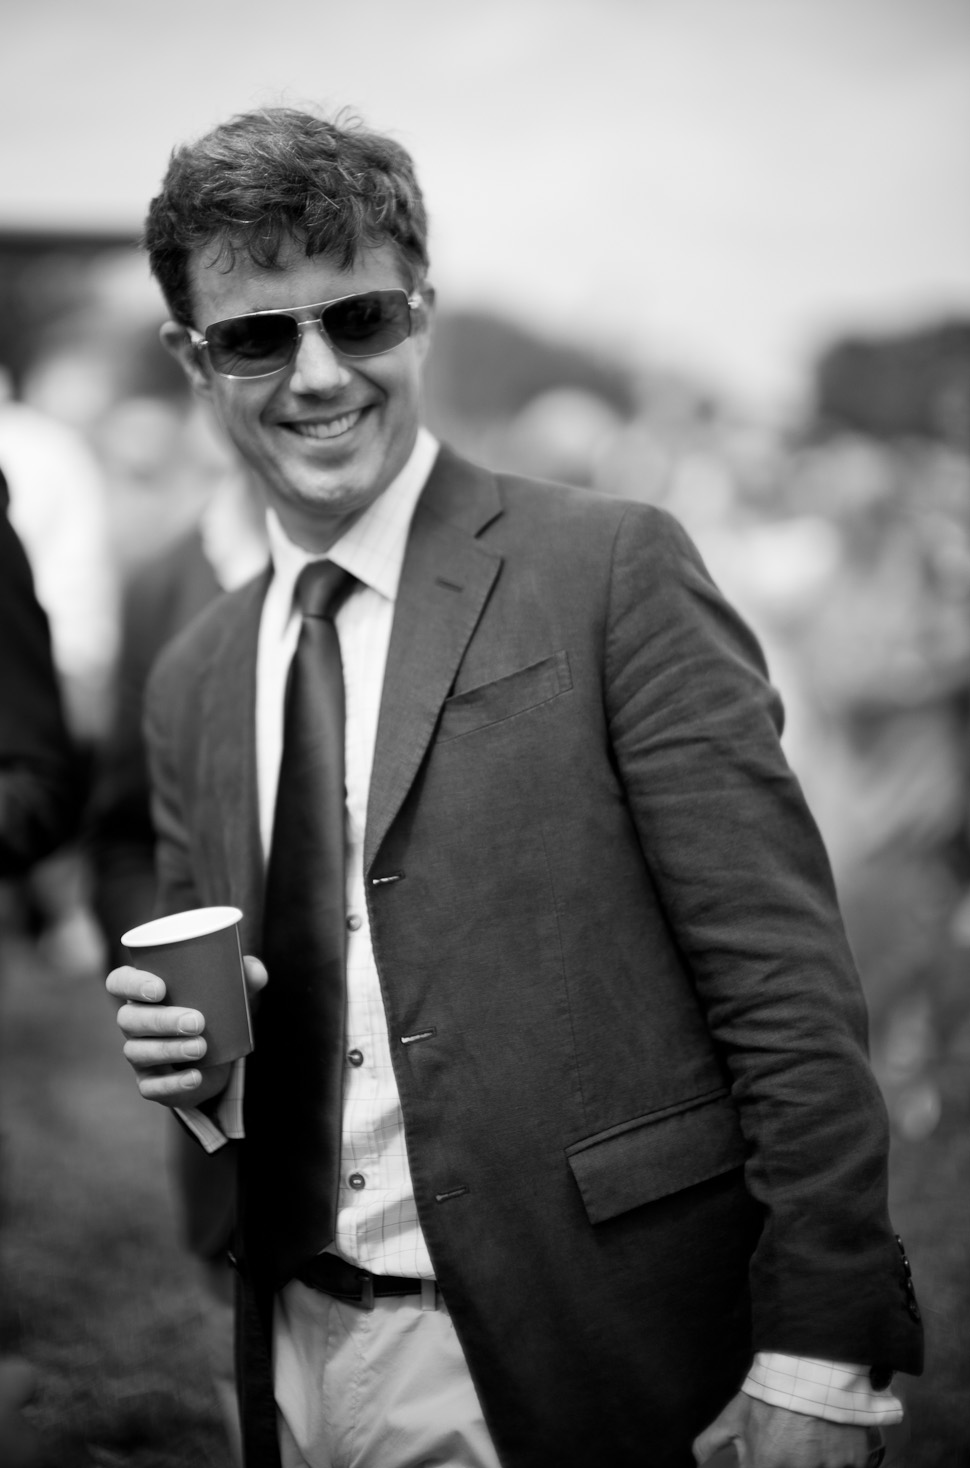 Crown Prince Frederik of Denmark, June 2013. Leica M 240 with Leica 50mm Noctilux-M ASPH f/0.95. © 2013 Thorsten Overgaard.